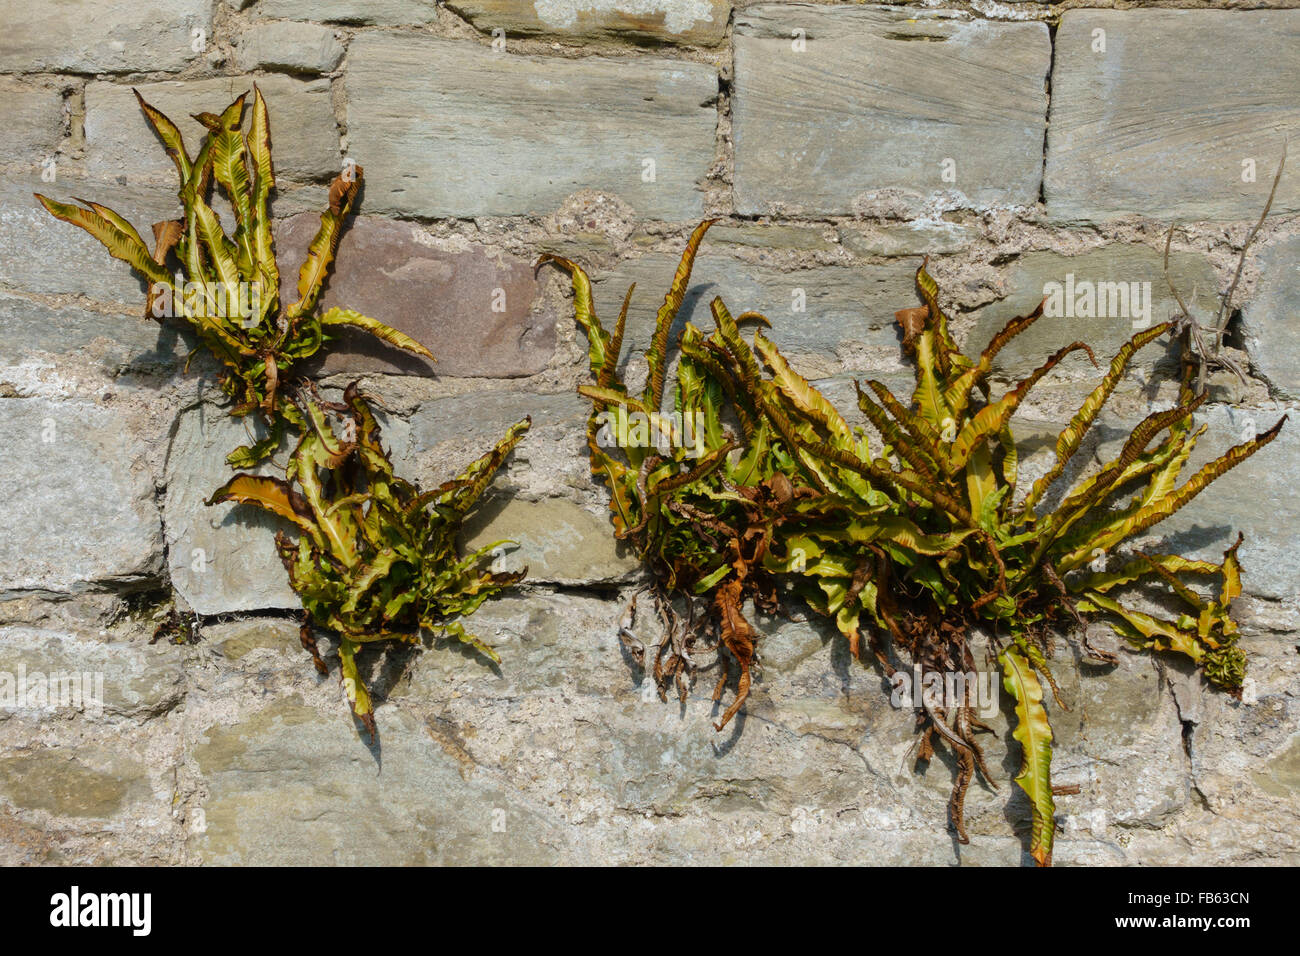 Liverwort grows in a stone wall, Penitents Walk next to the River Tweed in Coldstream, Scotland. Stock Photo